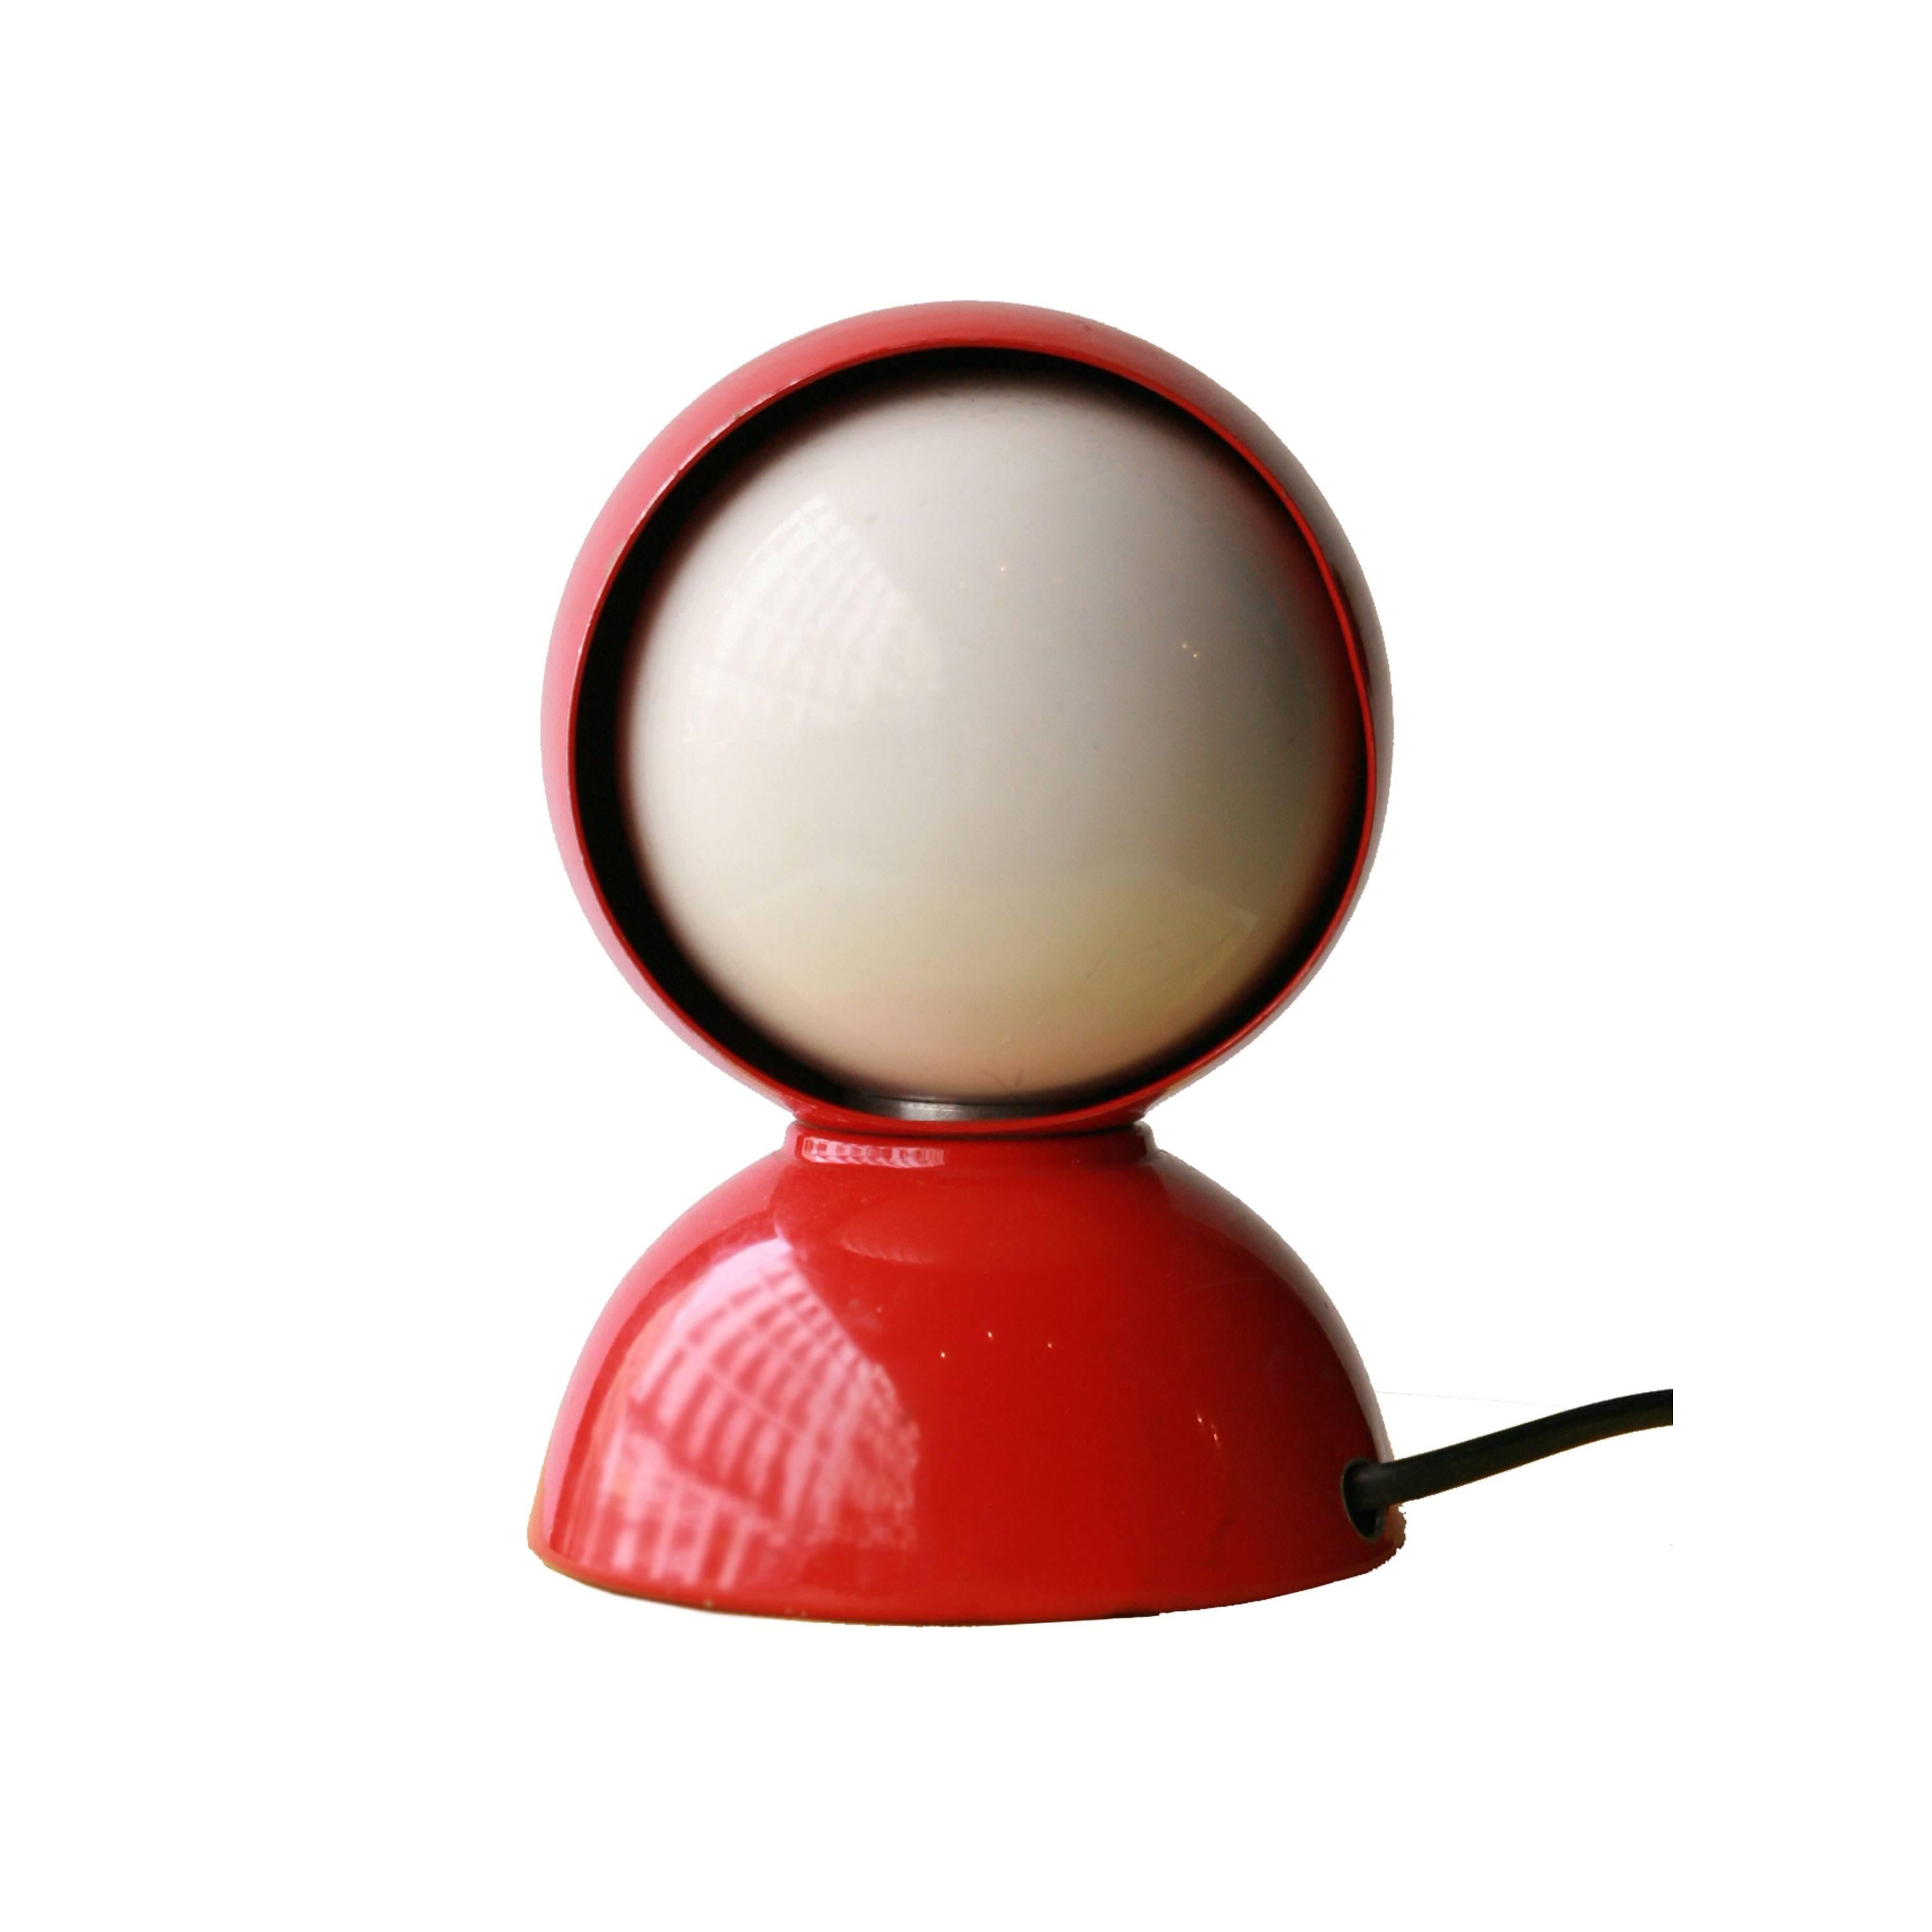 Table lamp. Eclipse model. Designed by Vico Magistretti (1920-2006). Made of red laquered steel with white laquered spinning interior.

